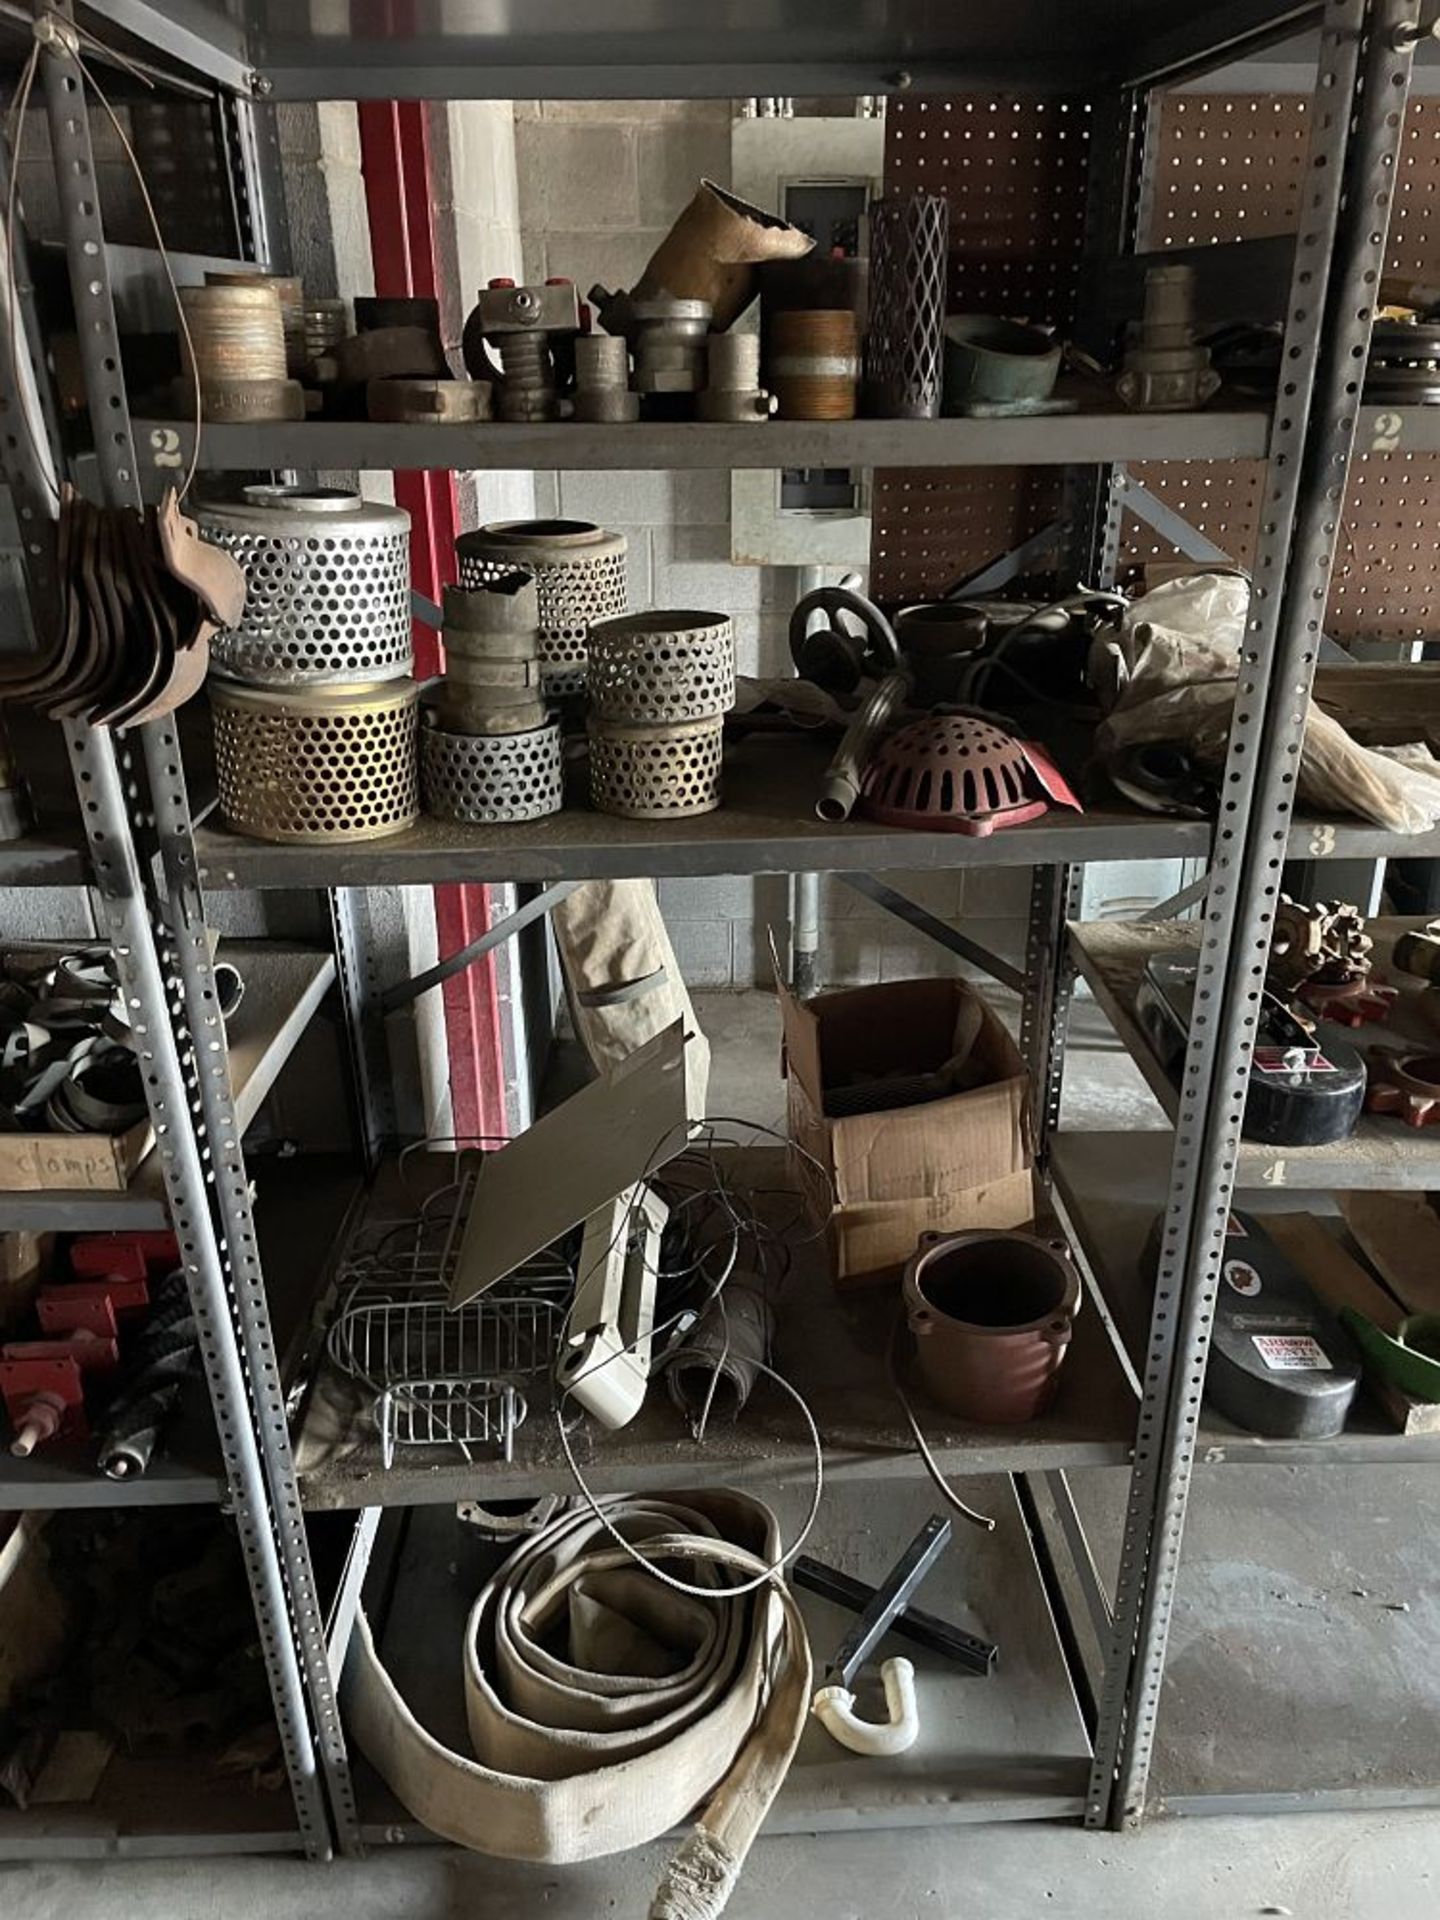 Parts Department: Contents & Shelves, 16 sections - Image 2 of 16